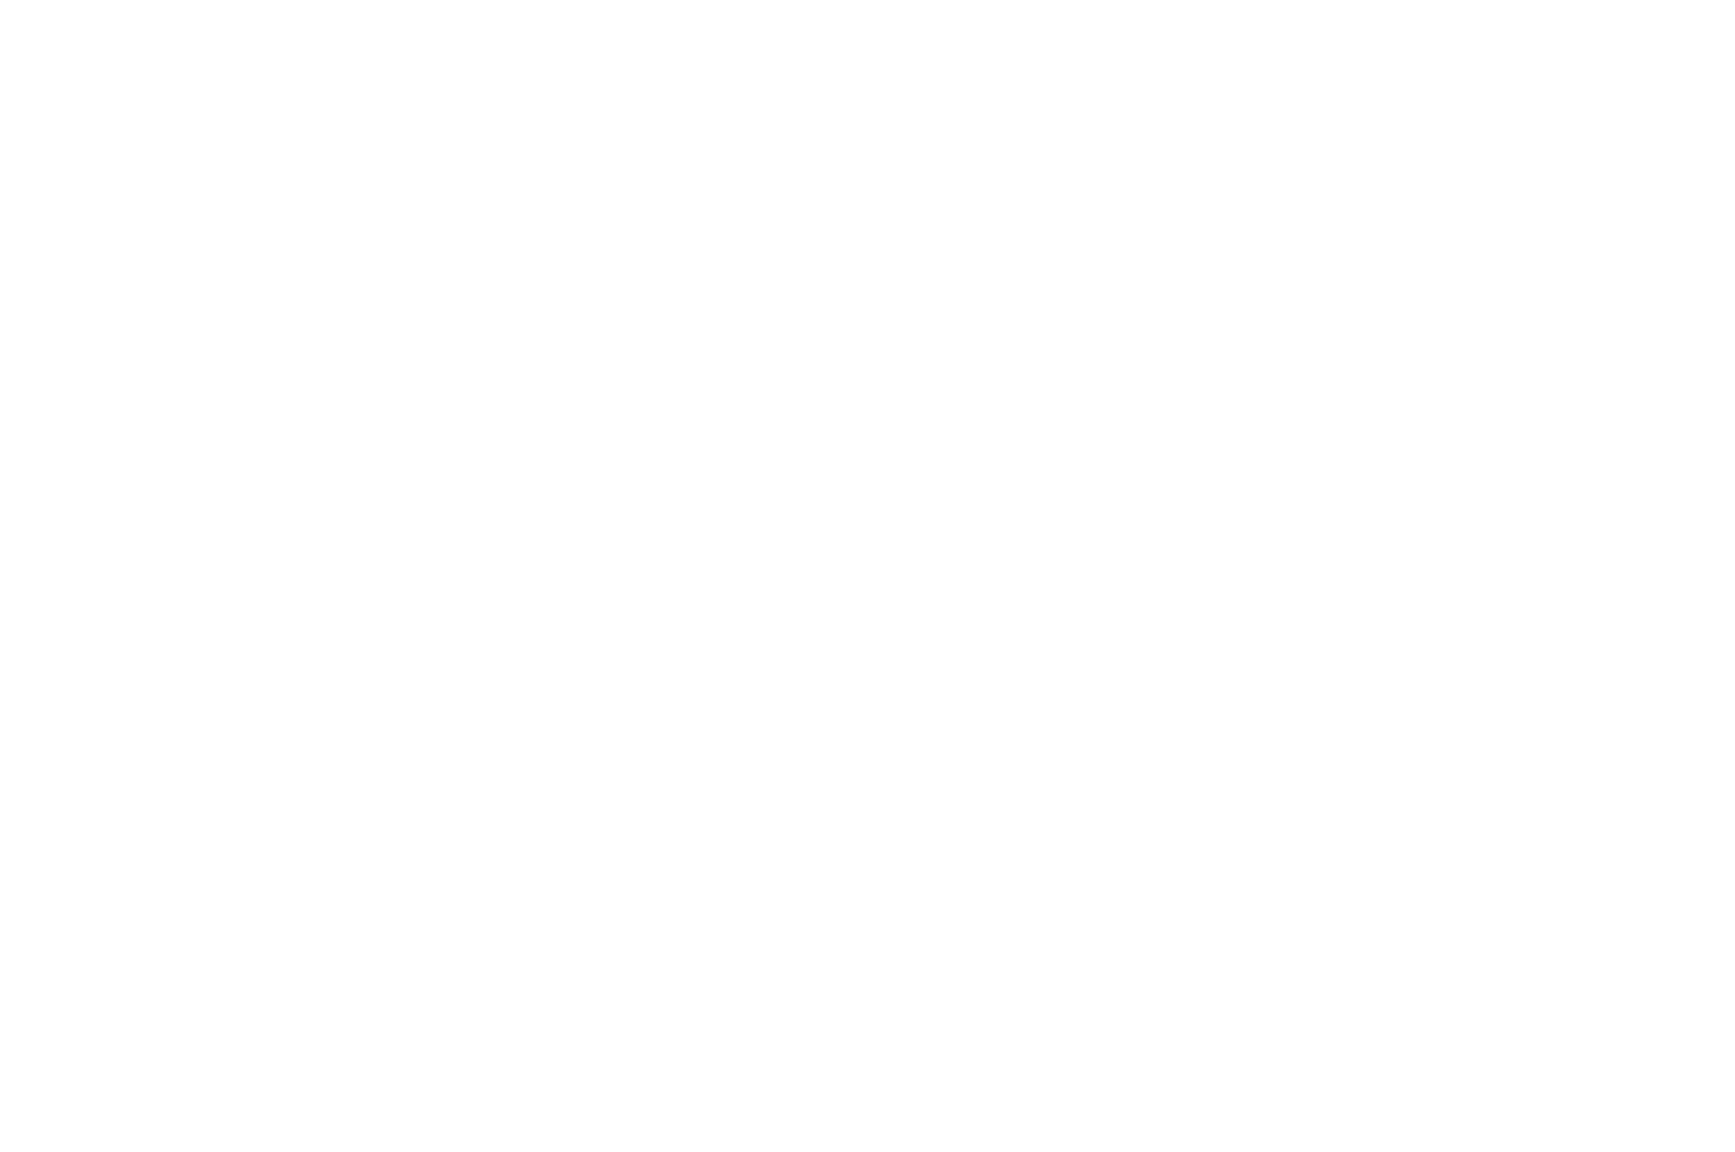 OFFICIAL SELECTION - LONDON FILM WEEK - 2019 (1).png